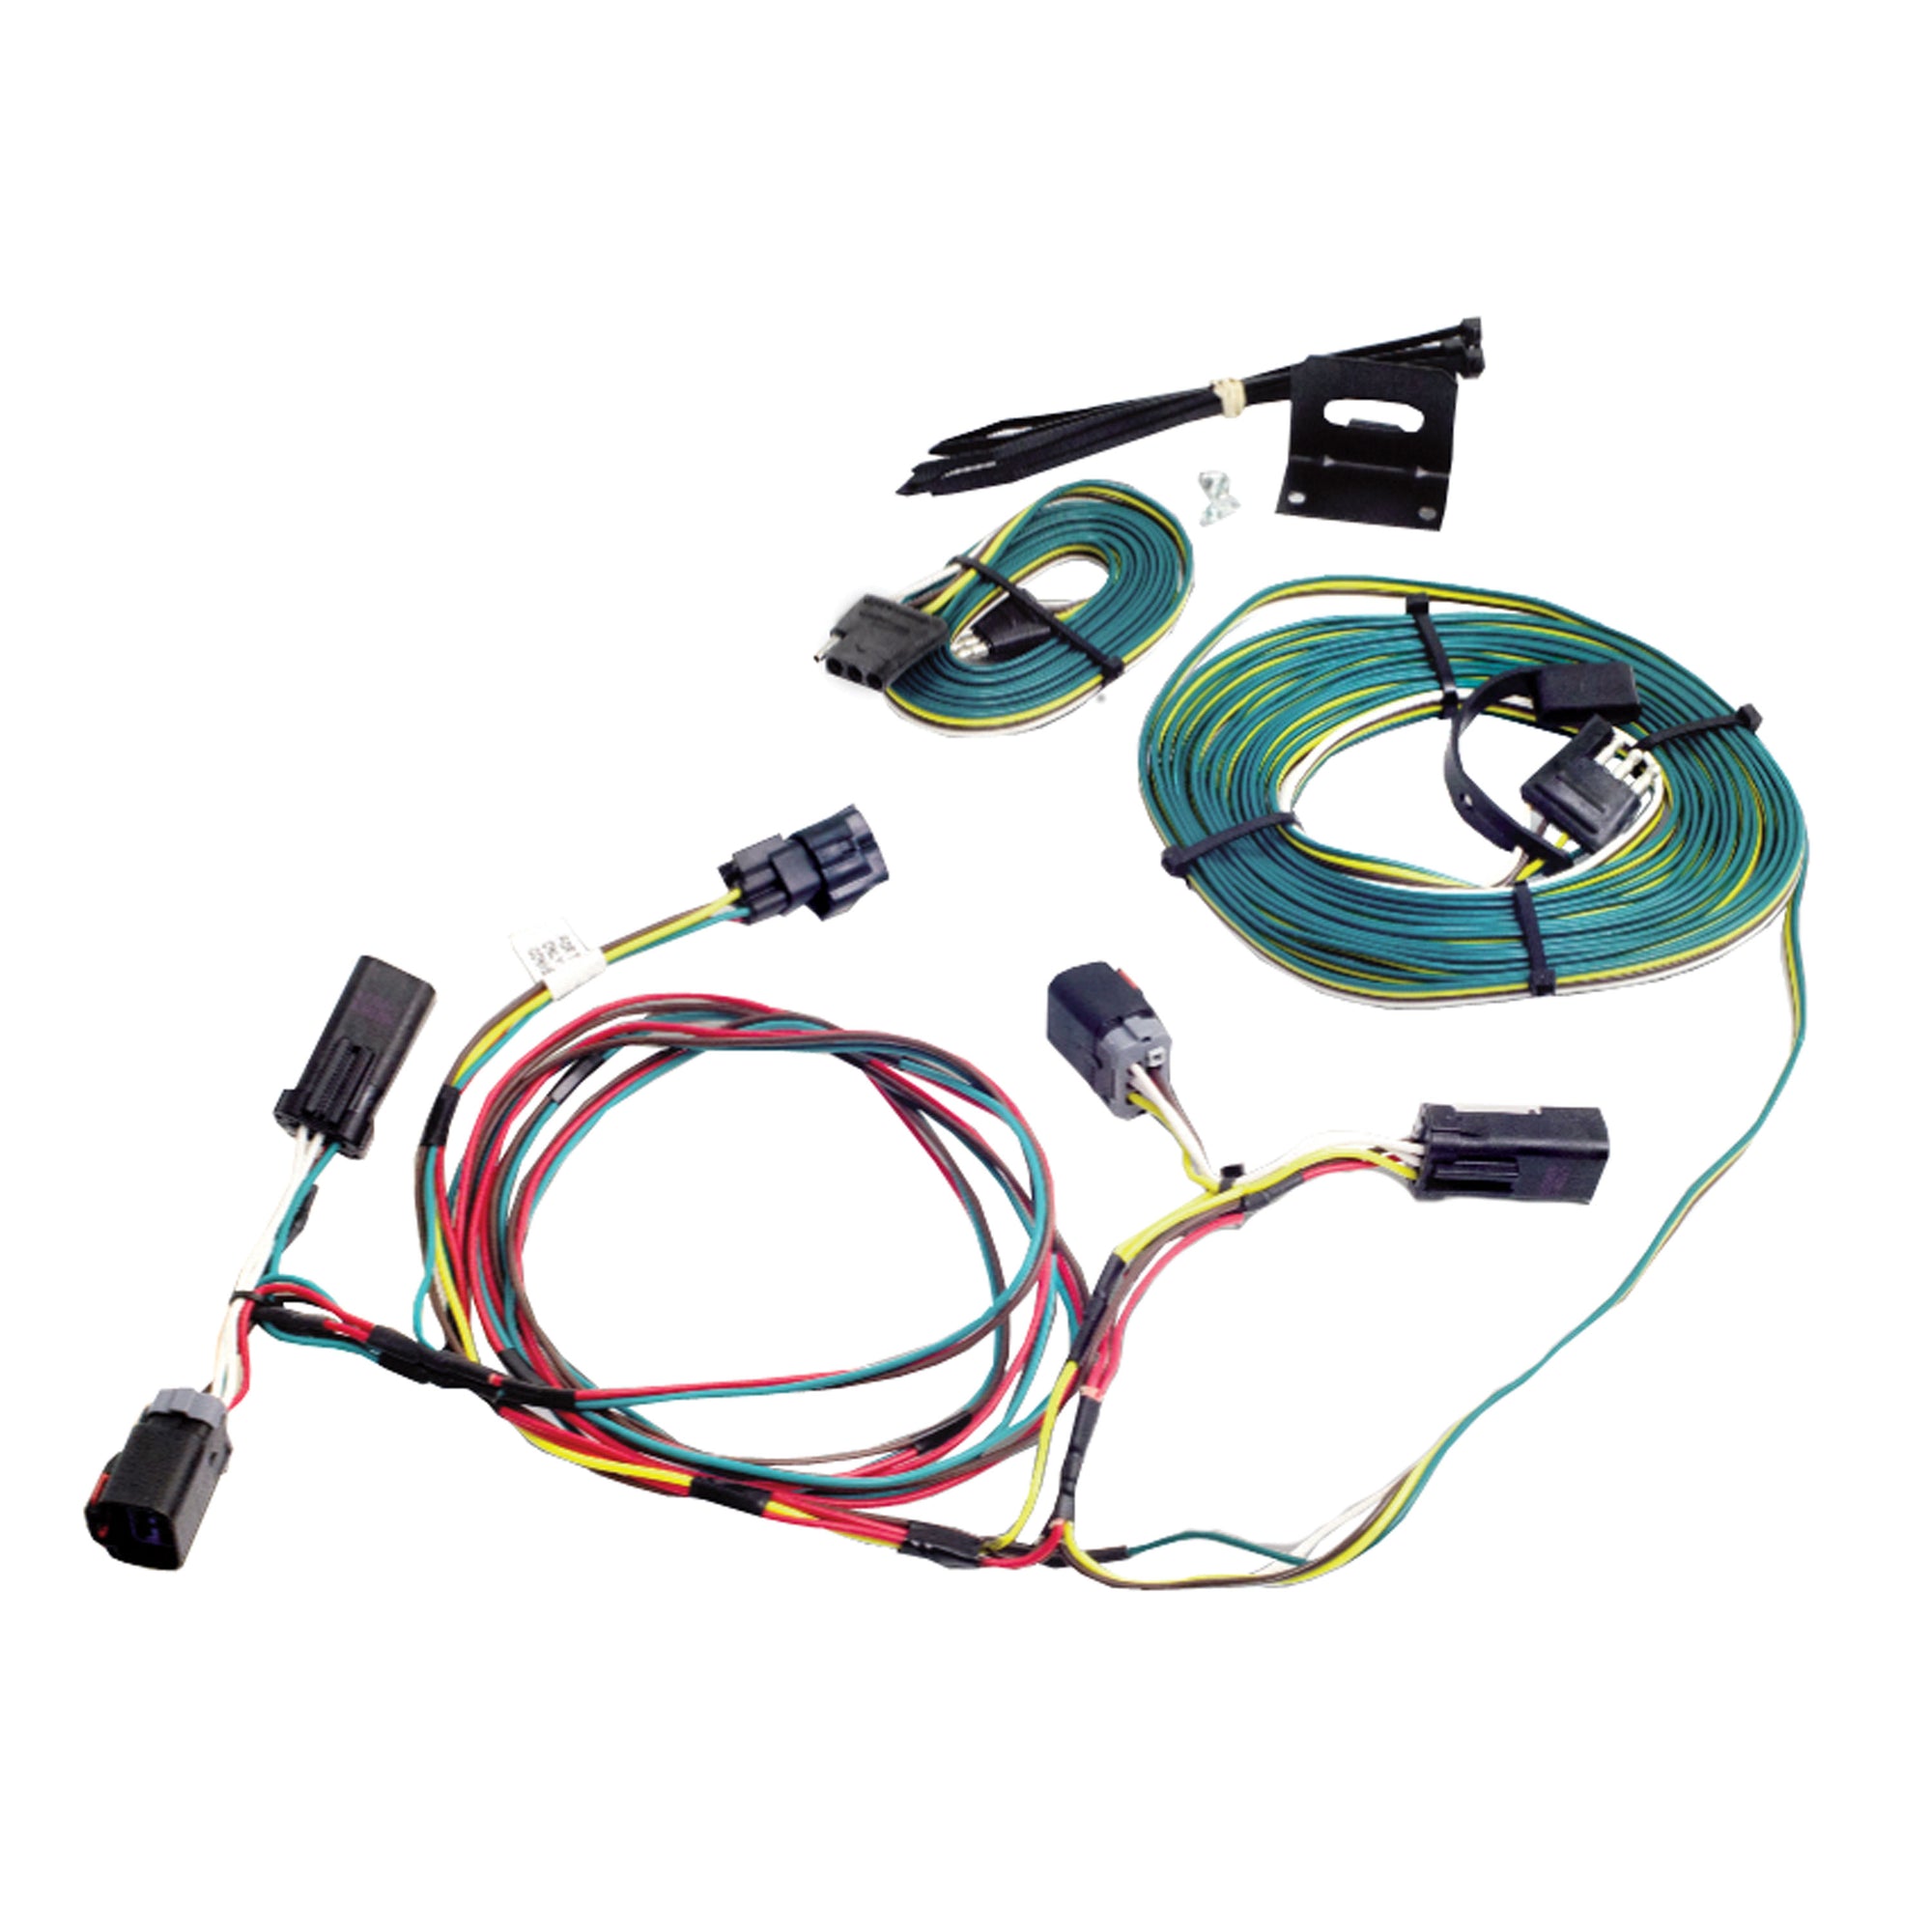 Demco 9523096 Towed Connector Vehicle Wiring Kit - For Saturn Vue '08-'10